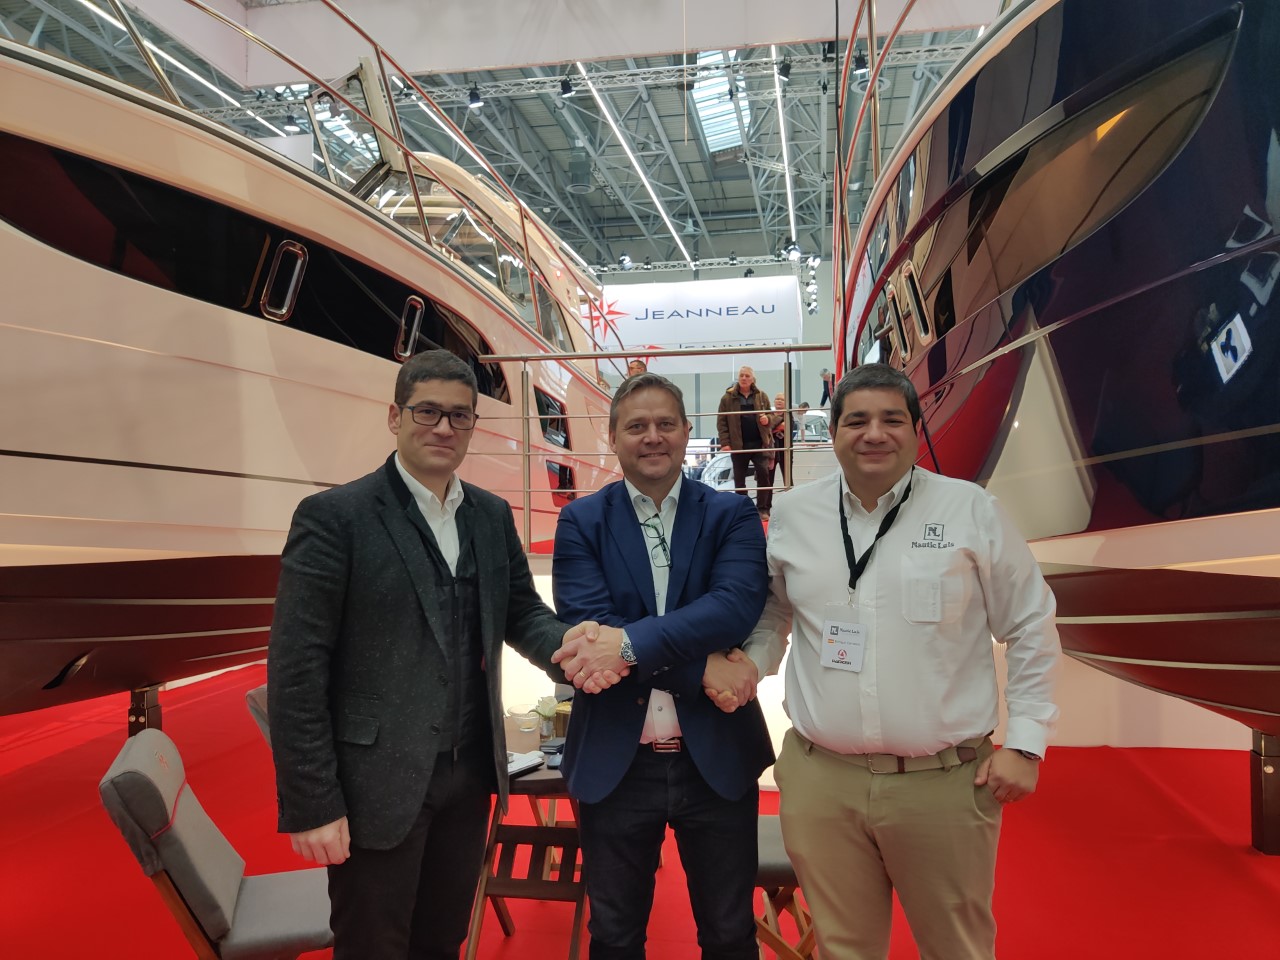 Q Experience by Nextfour Solutions Ltd and Nautic Luis announces a Distribution agreement for Spain for 2023 onwards.